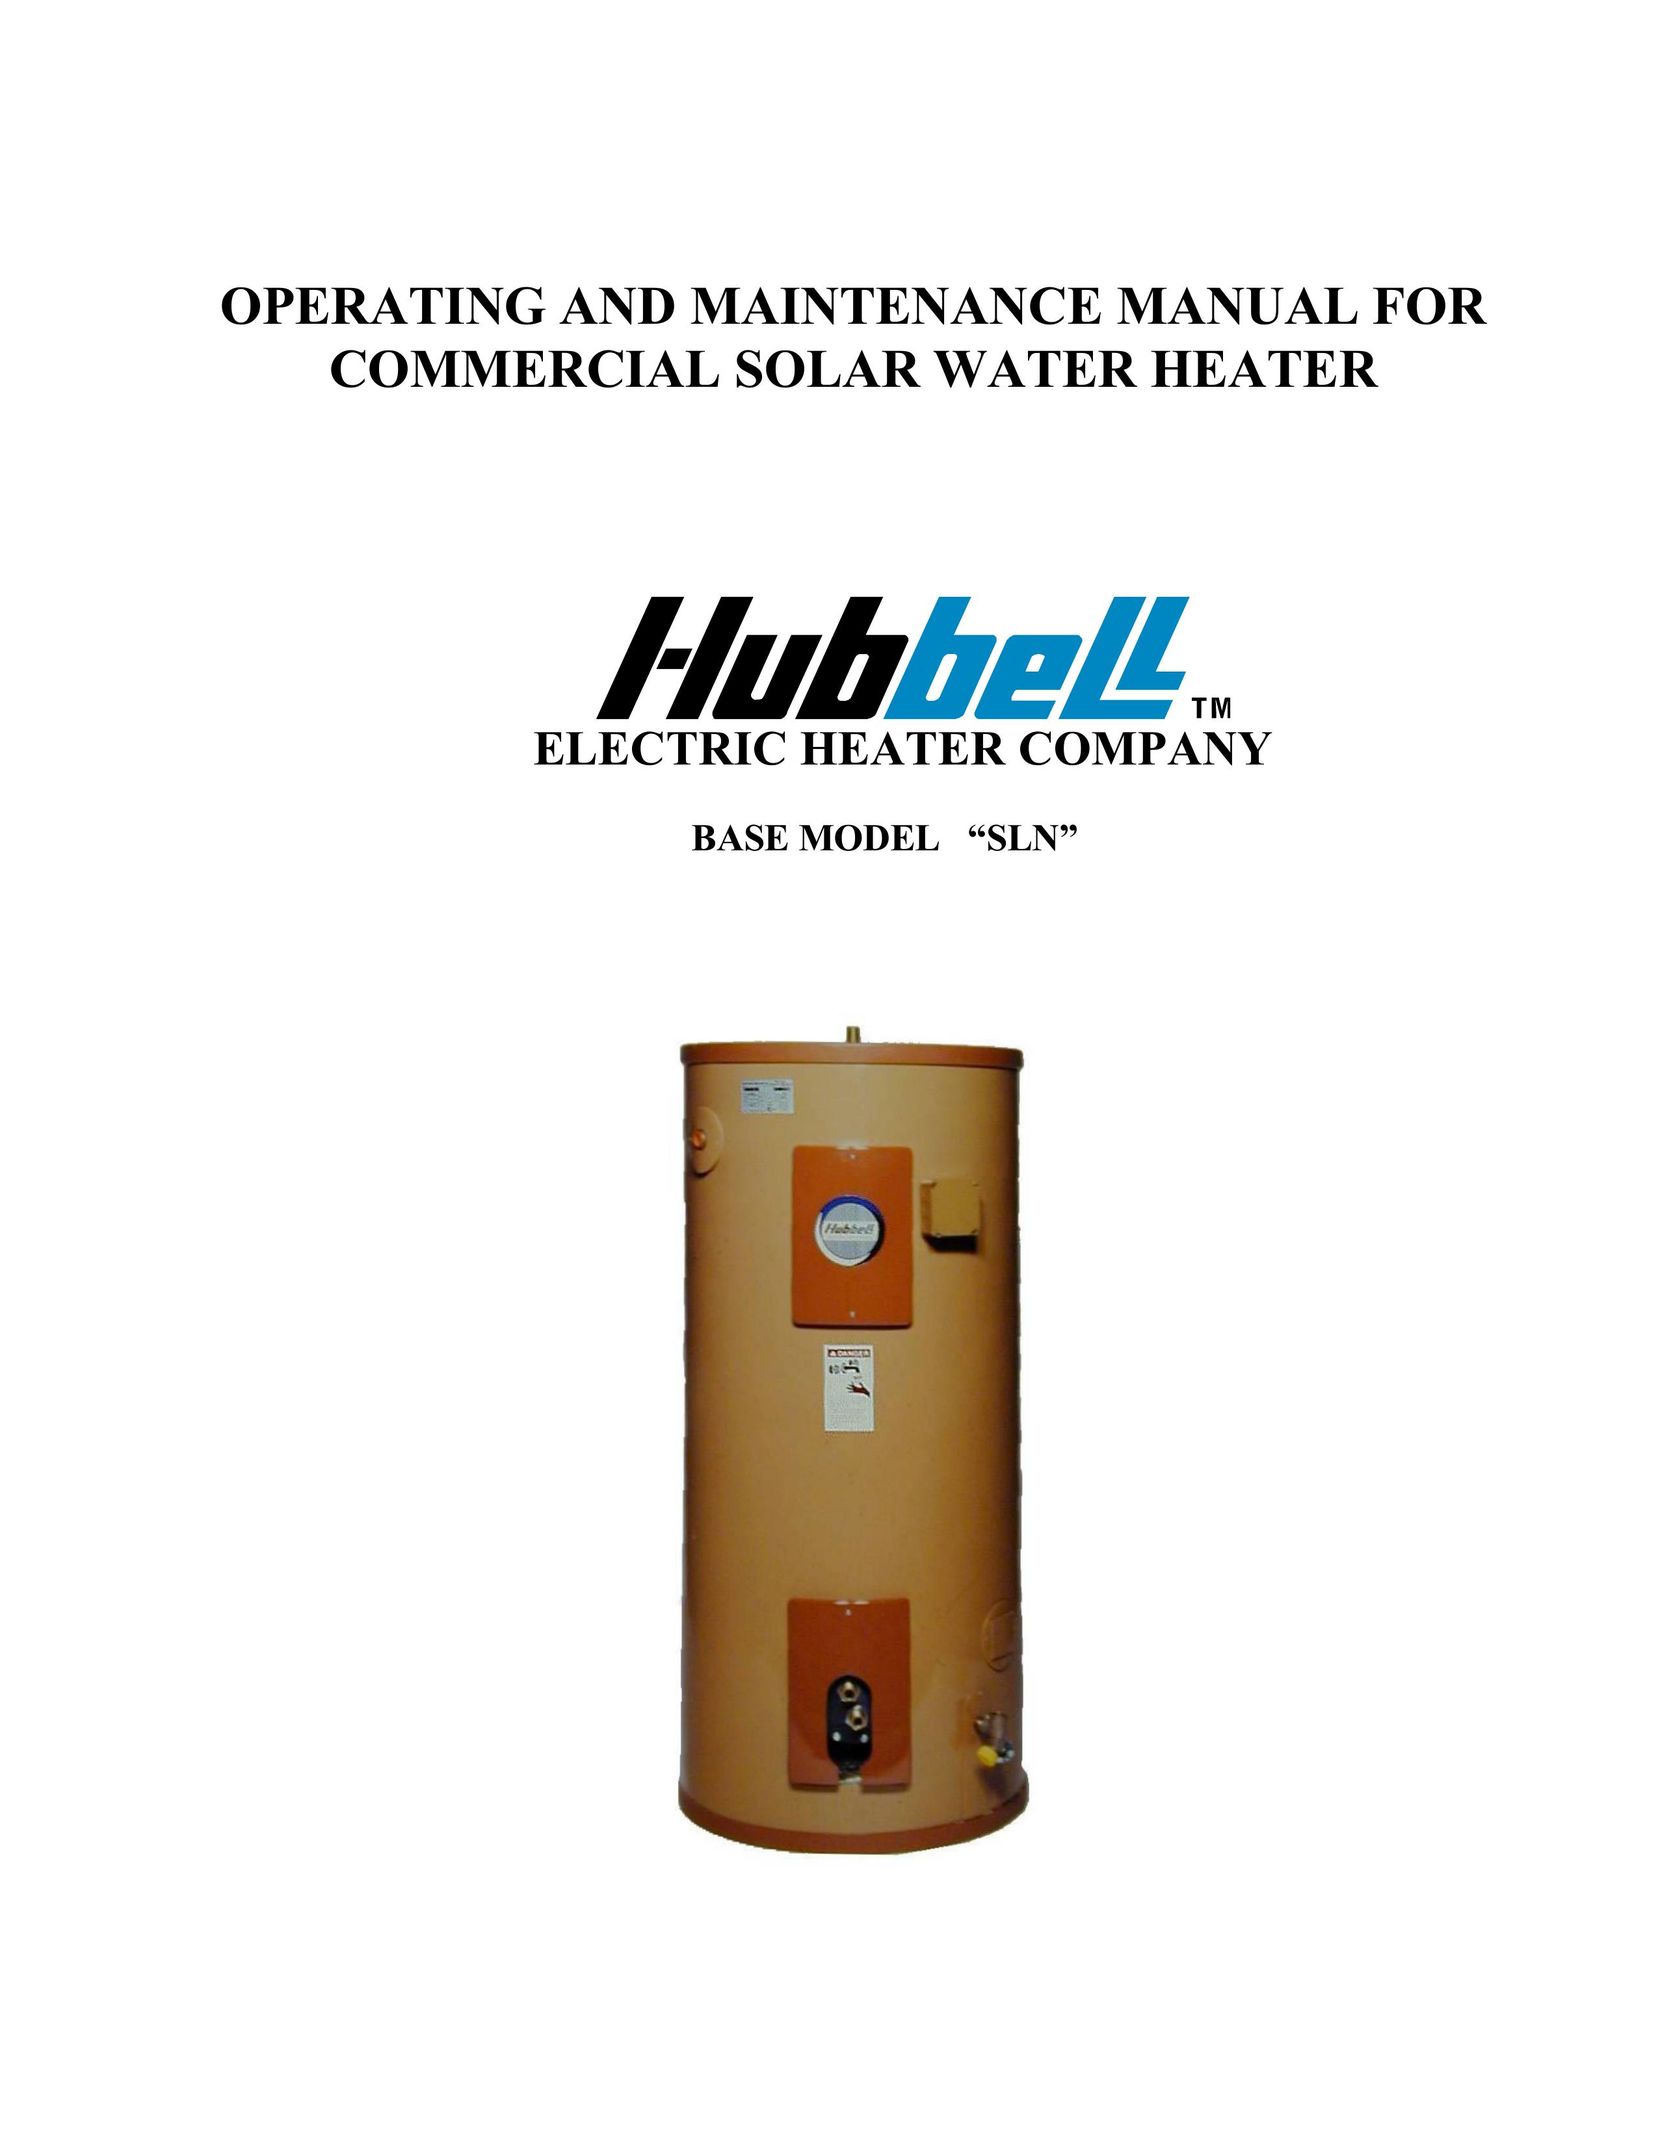 Hubbell Electric Heater Company SLN Water Heater User Manual